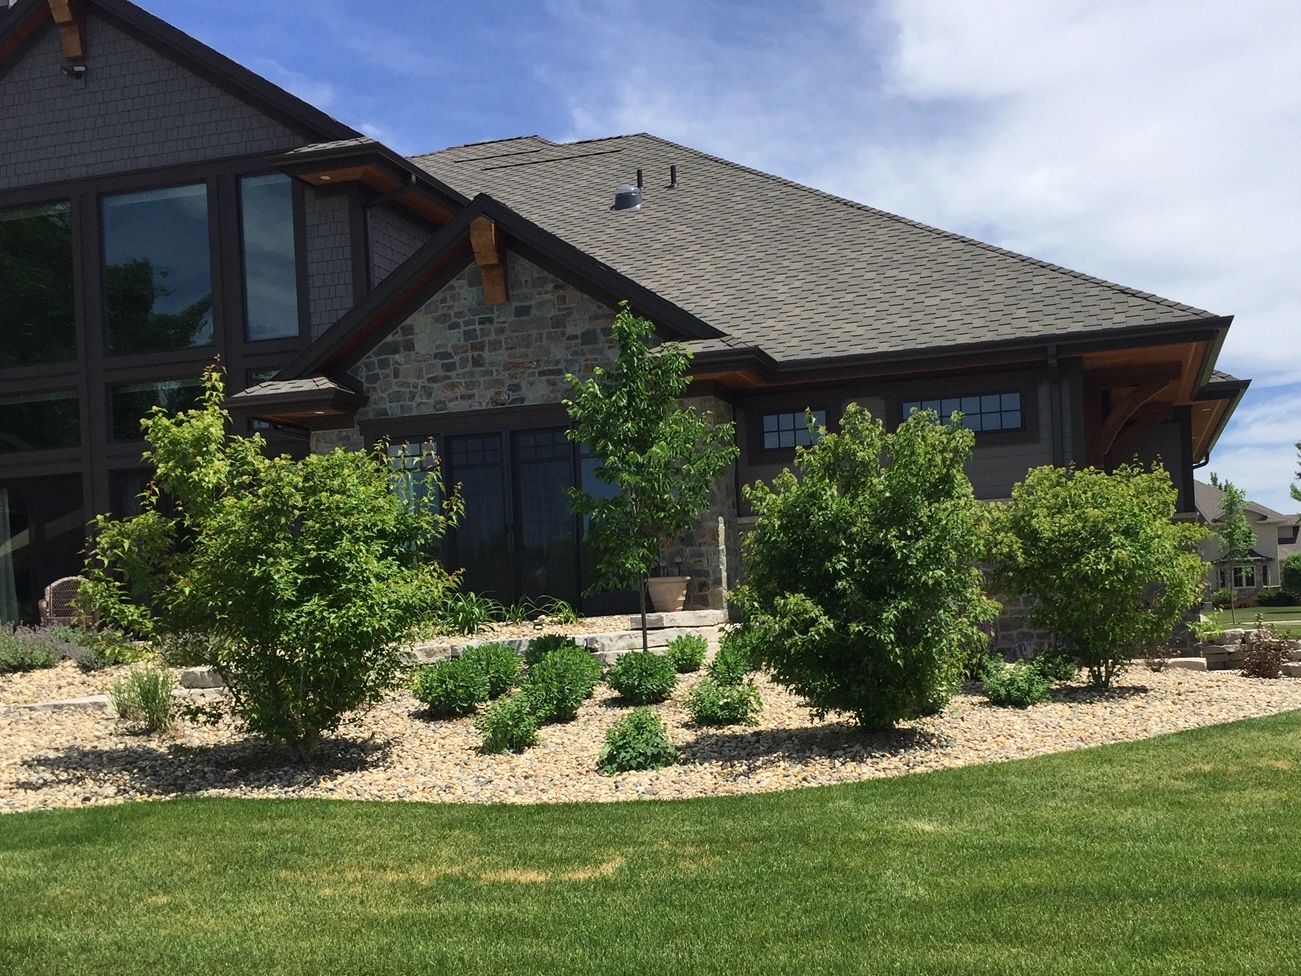 Sioux Falls Landscaper Pumps Up Curb Appeal With Trees And Shrubs